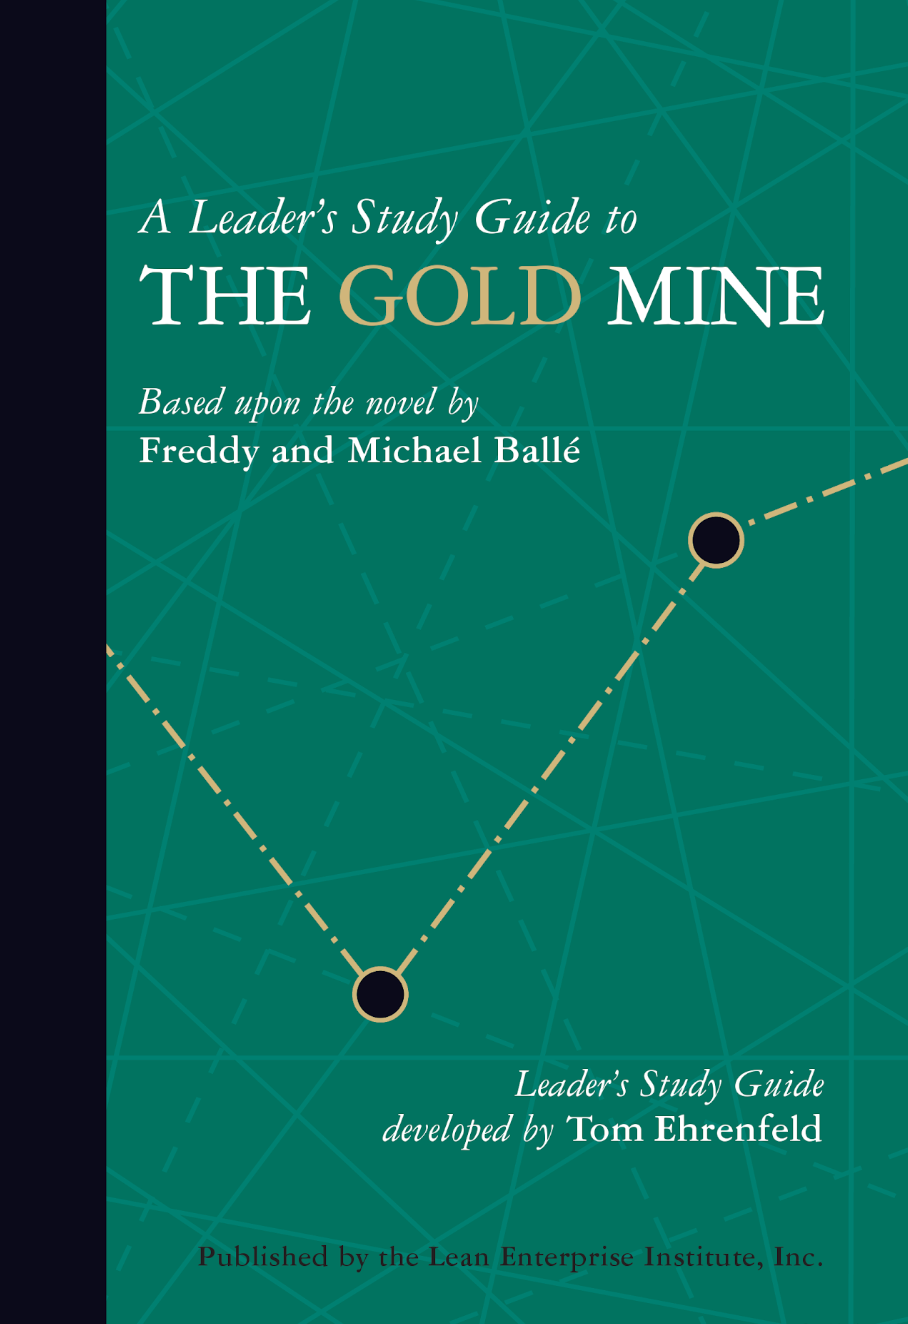 A Leader's Study Guide to The Gold Mine